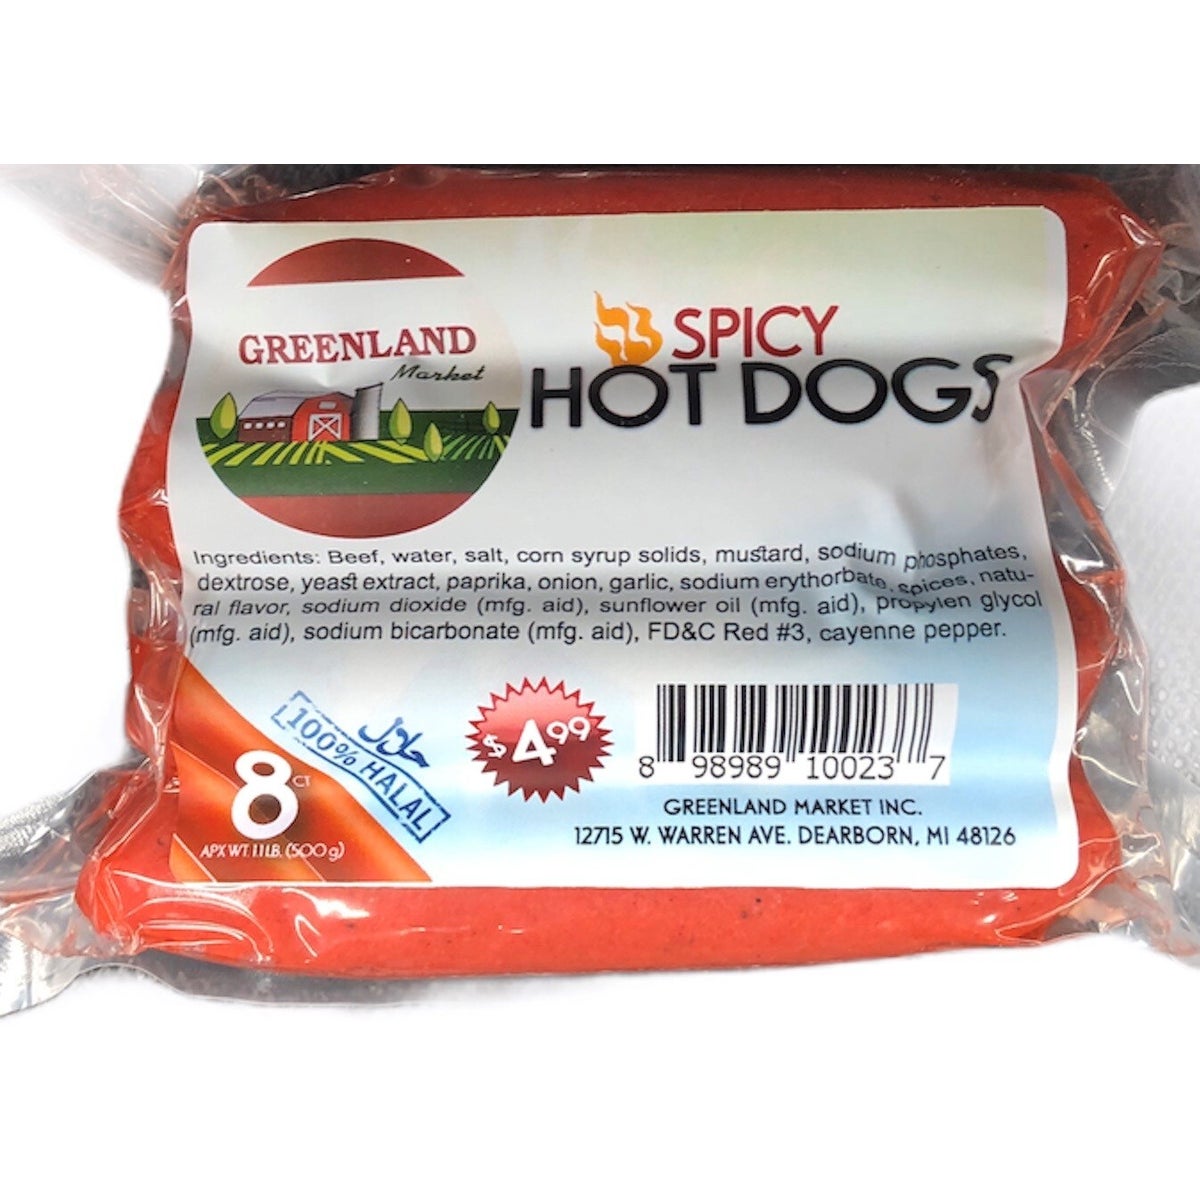 HALAL SPICY HOT DOGS (8 CT)